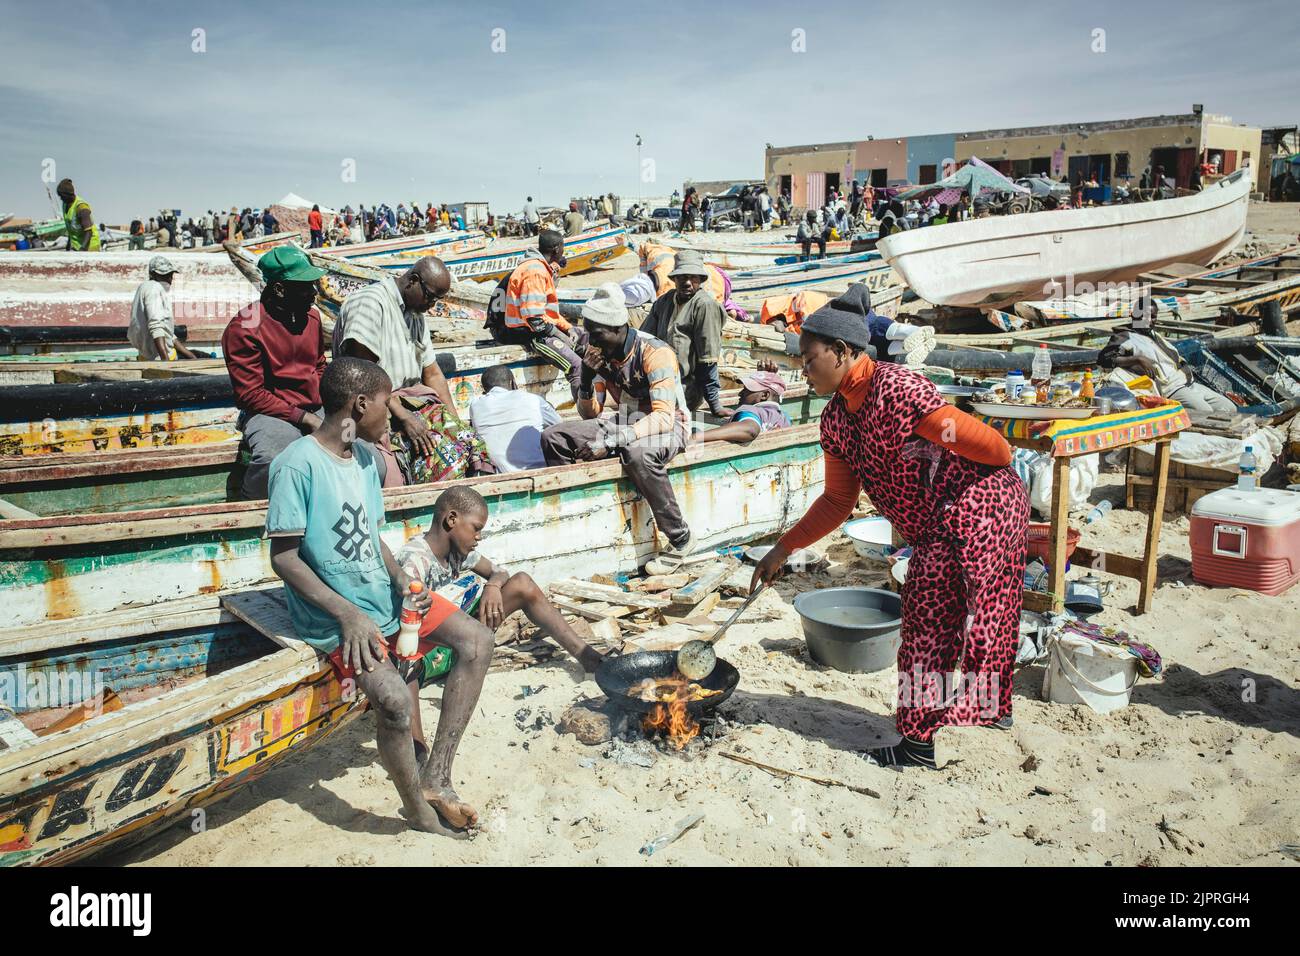 Traditional fishing beach, Plage des Pecheurs Traditionnels, a family prepares their lunch on the beach, Nouakchott, Mauritania Stock Photo